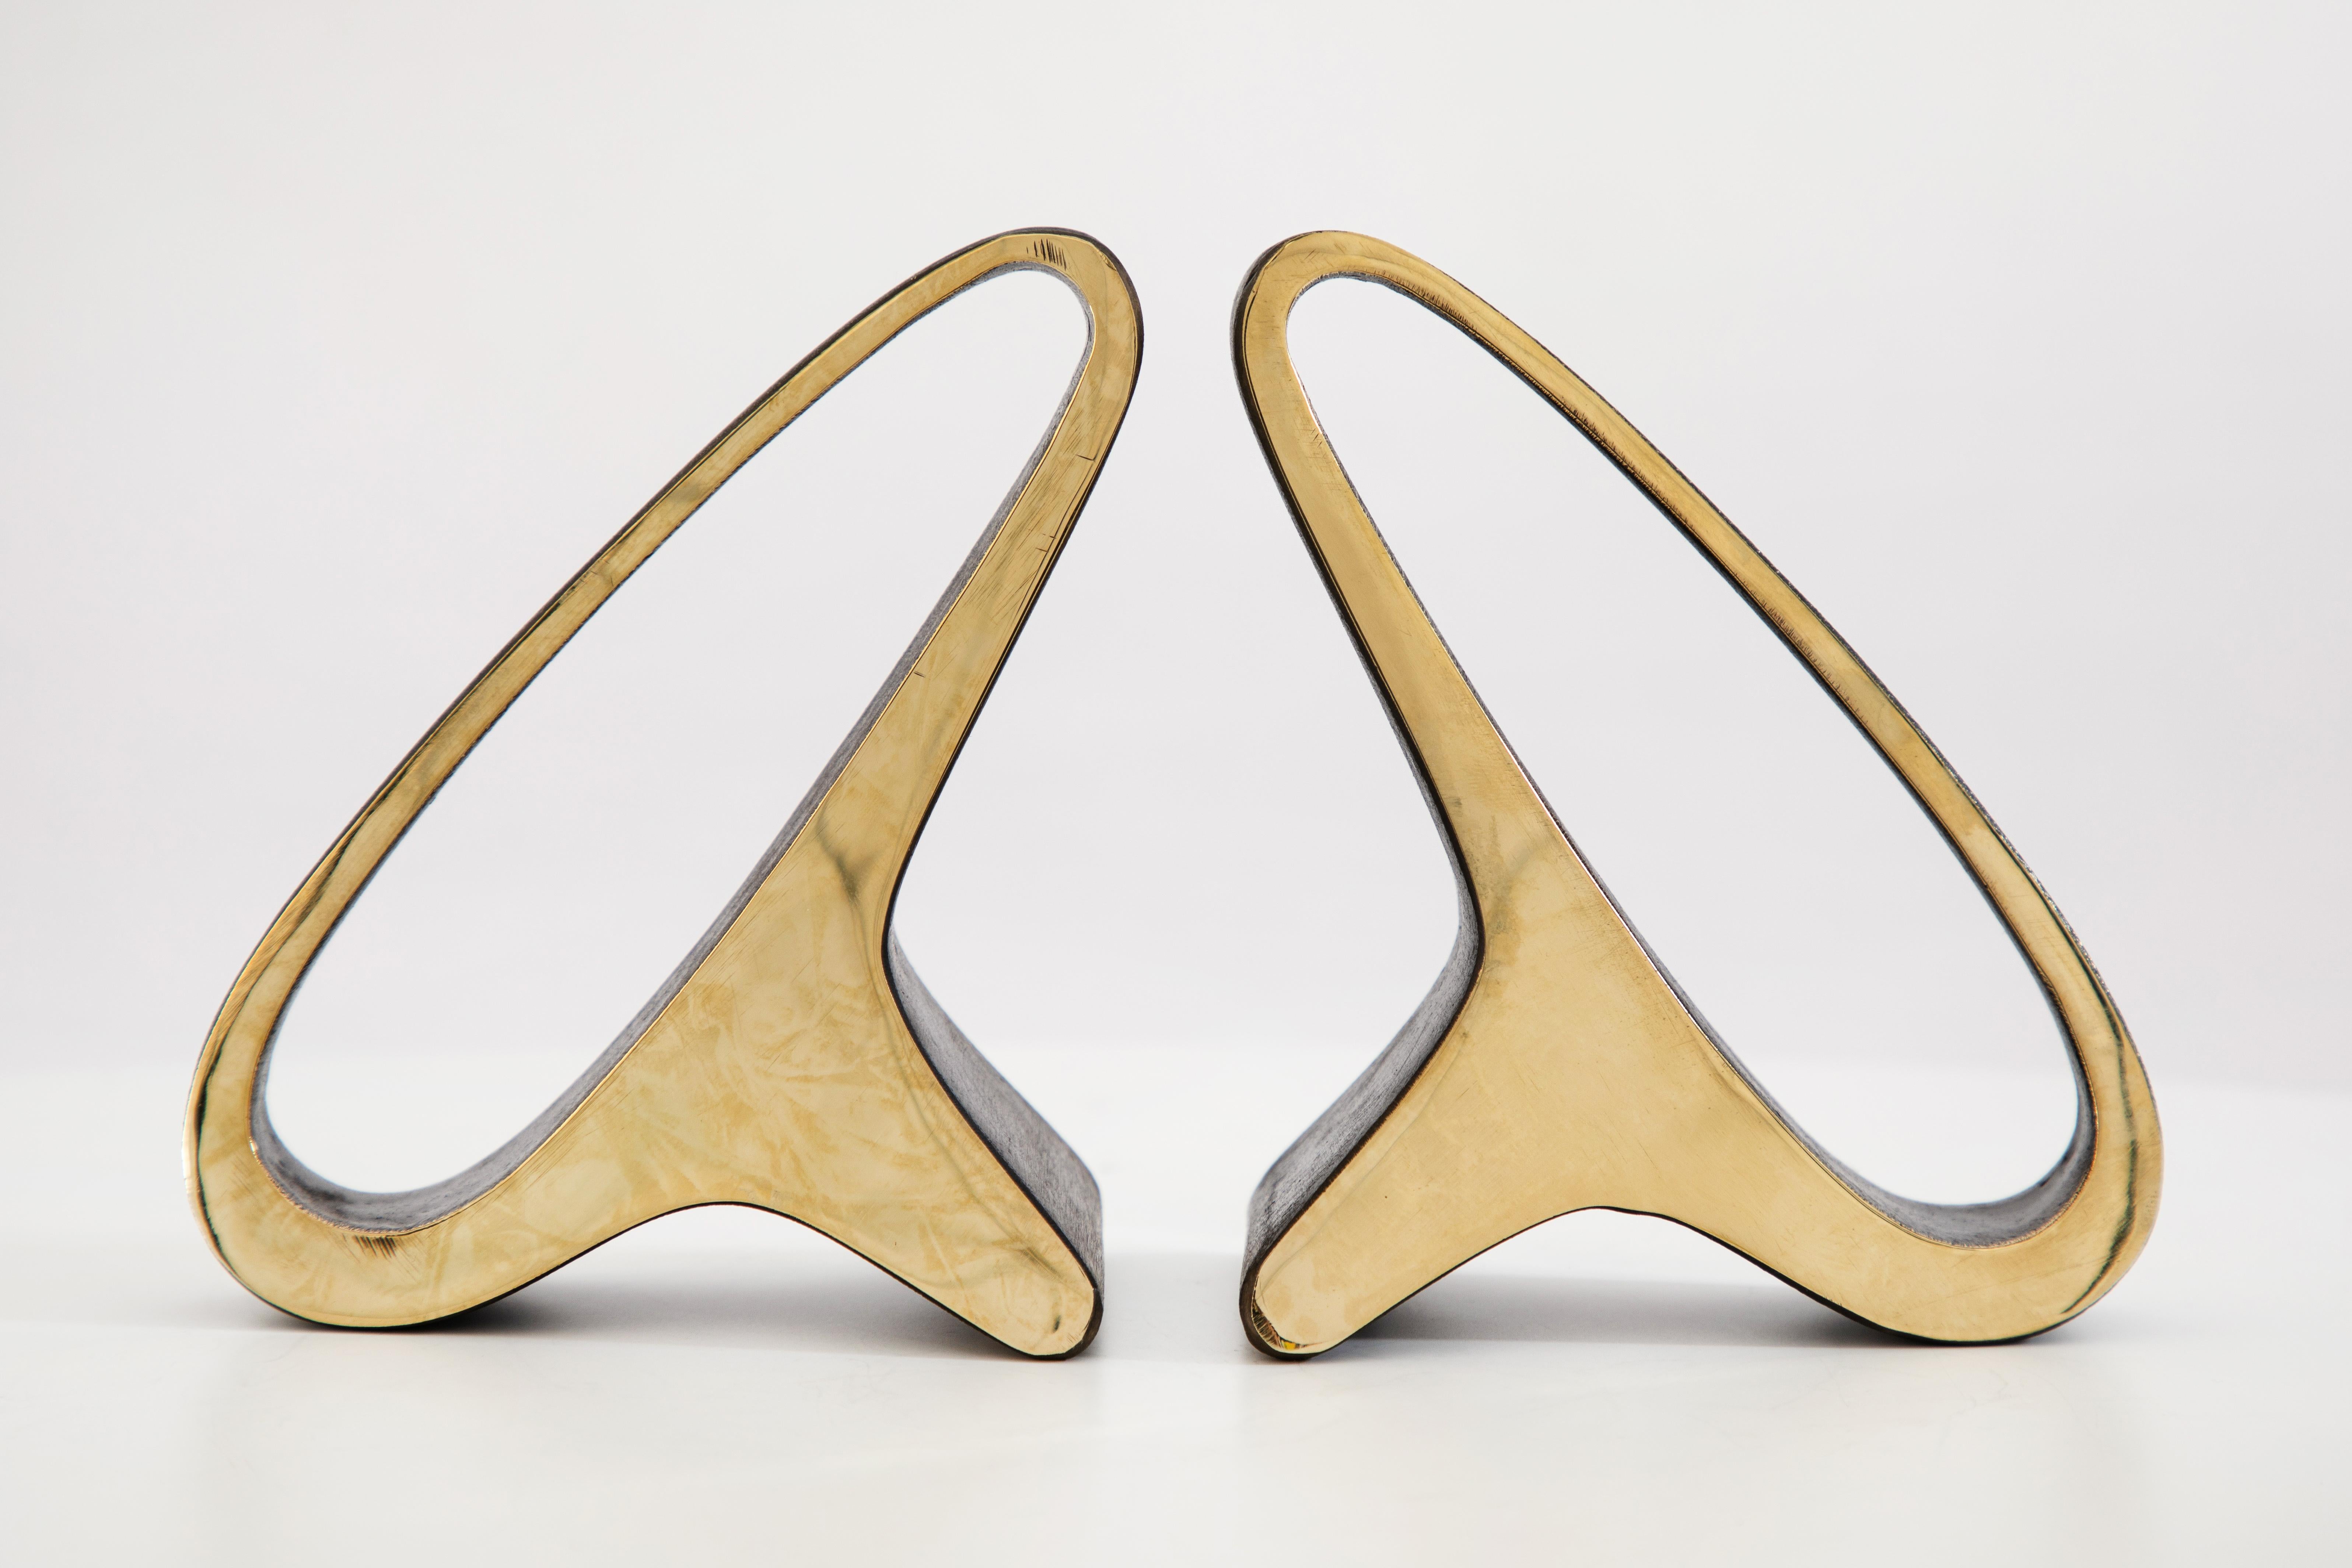 Pair of Carl Auböck model #3848 brass bookends. Designed in the 1950s, this incredibly refined and sculptural pair of bookends are executed in polished brass. 

Price is per pair. Available in unlimited quantities. Please note that in-stock